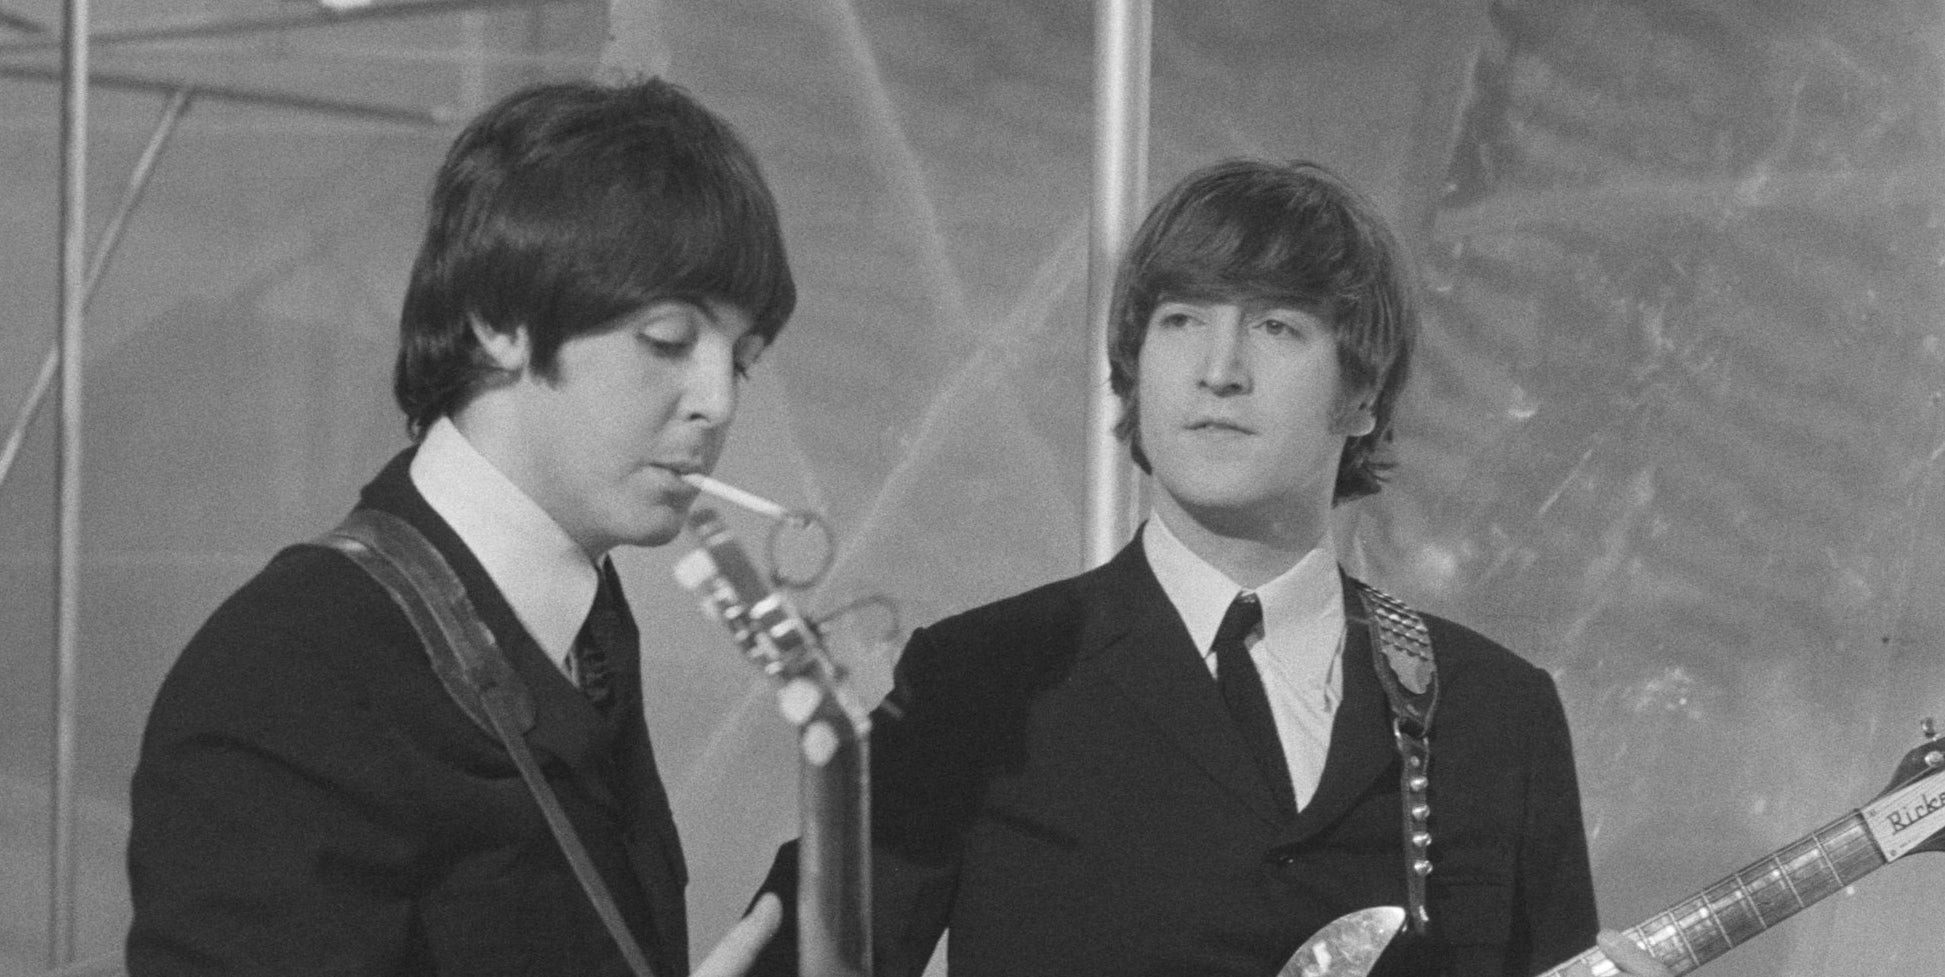 Musicians John Lennon (R) and Paul McCartney of English rock group The Beatles on the set of television special The Music of Lennon &amp;amp; McCartney at Granada Studios, Manchester, circa November 1965.